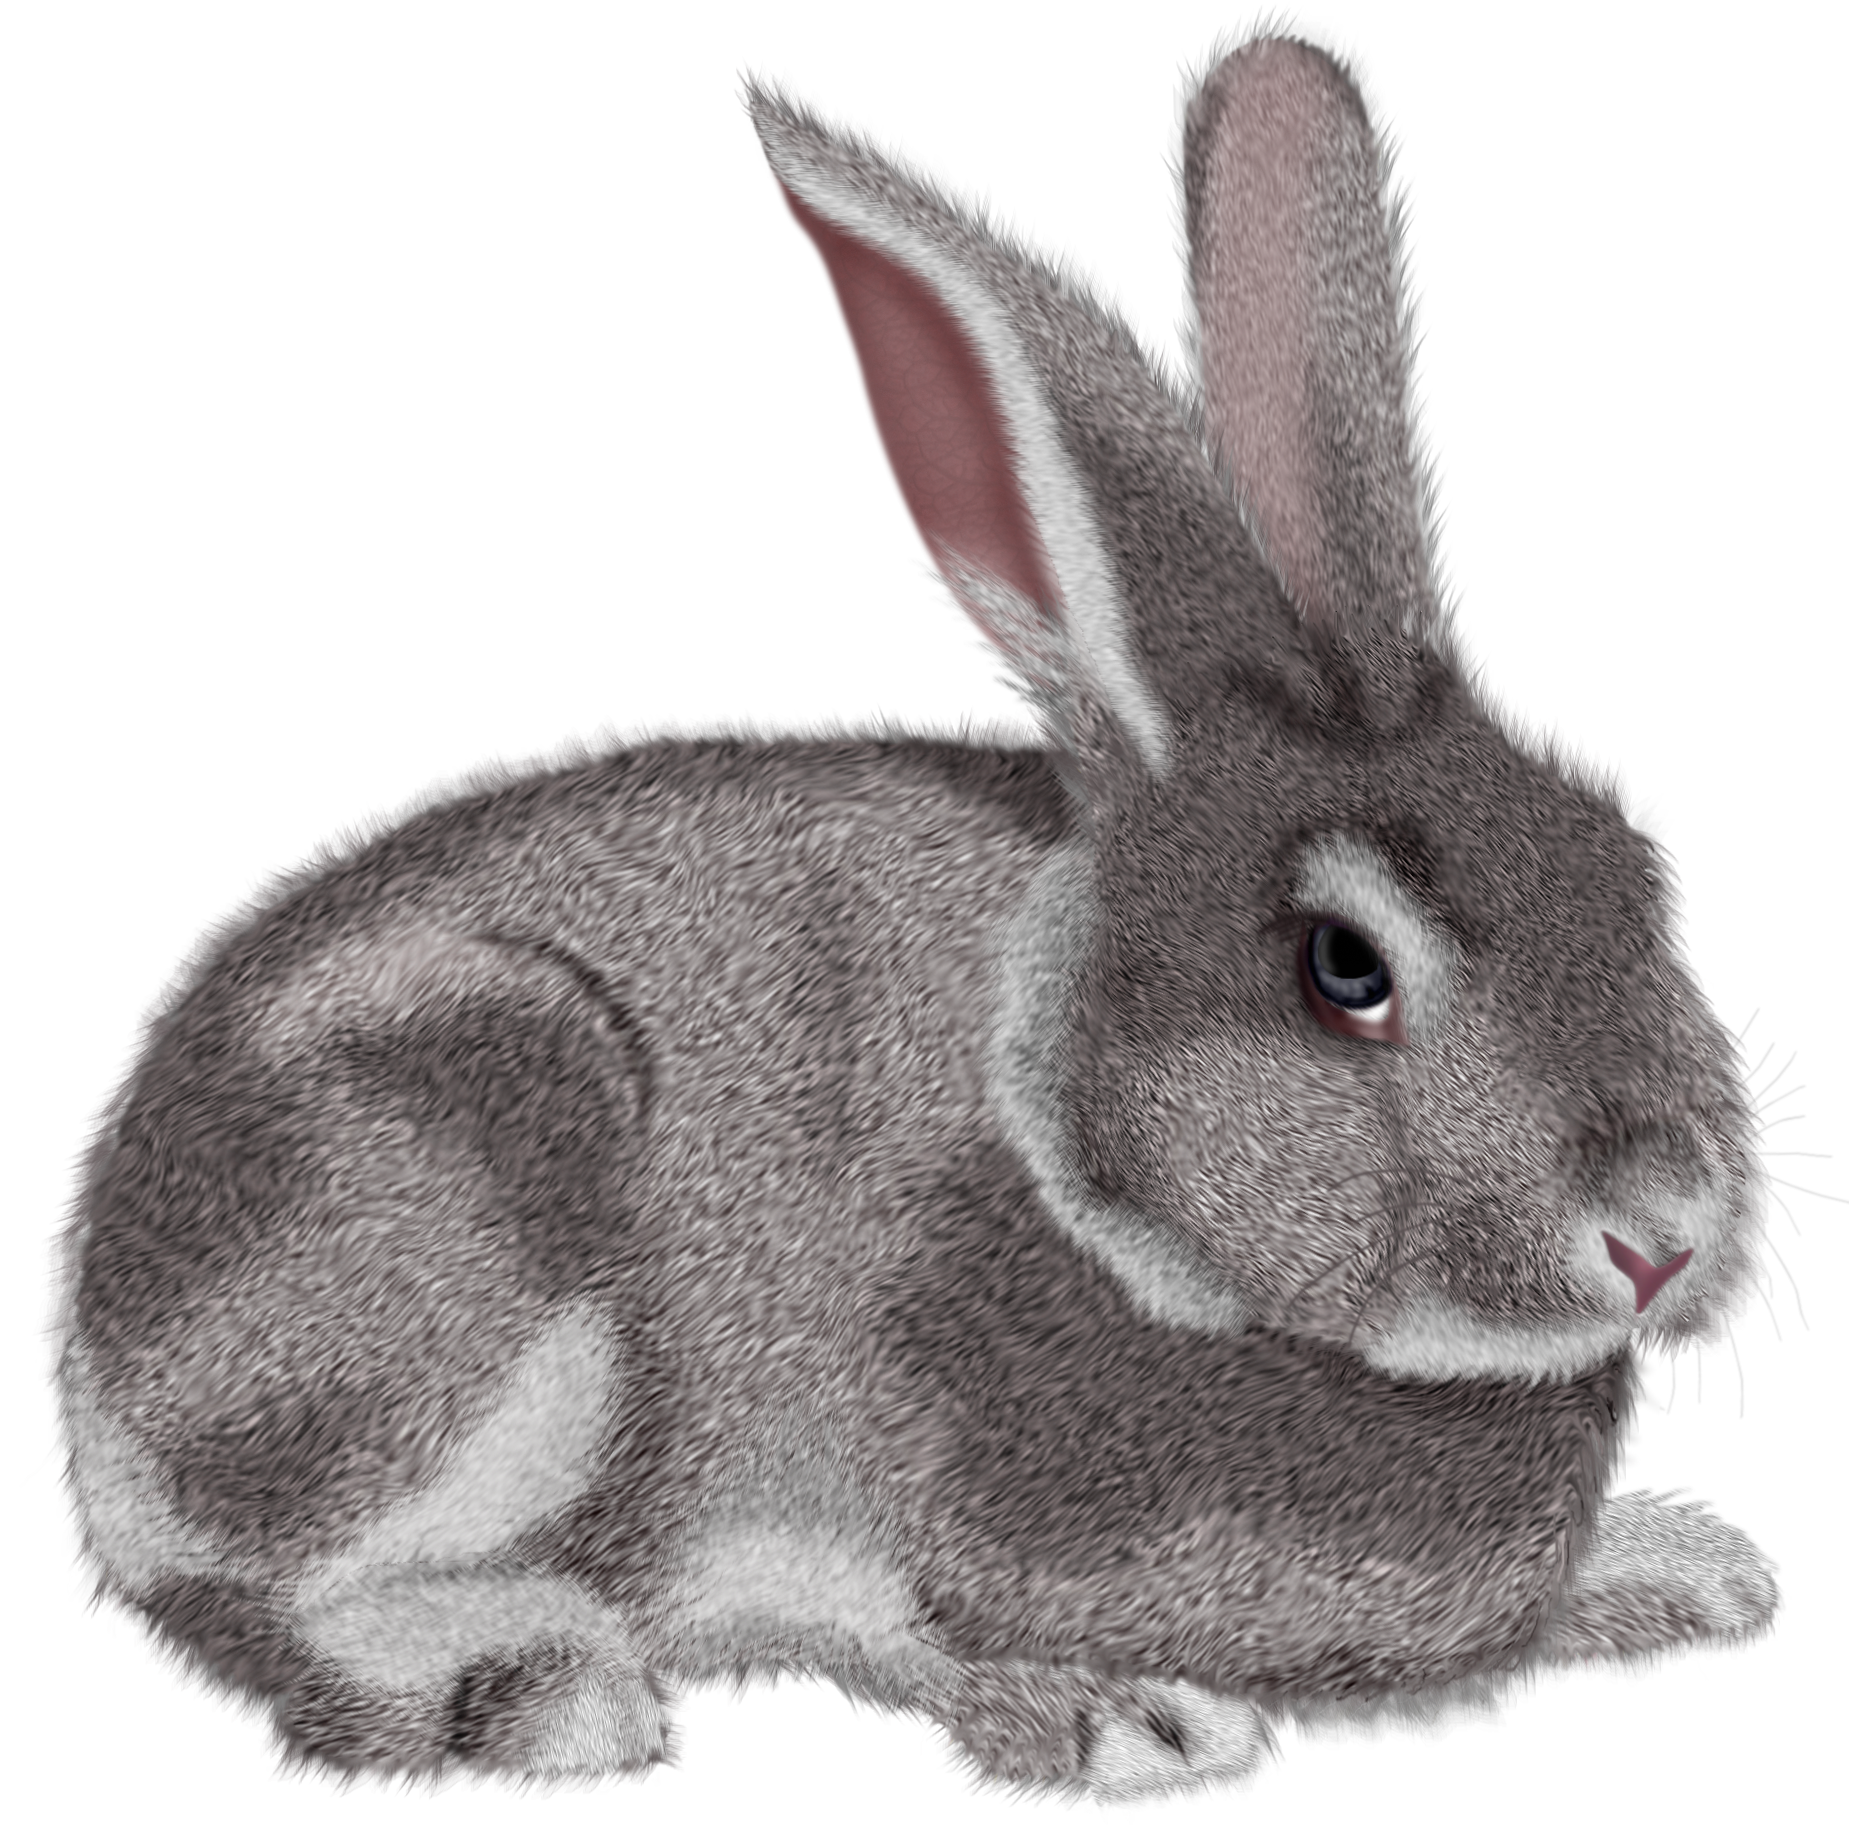 Bunny free rabbits clipart free clipart graphics images and photos 2